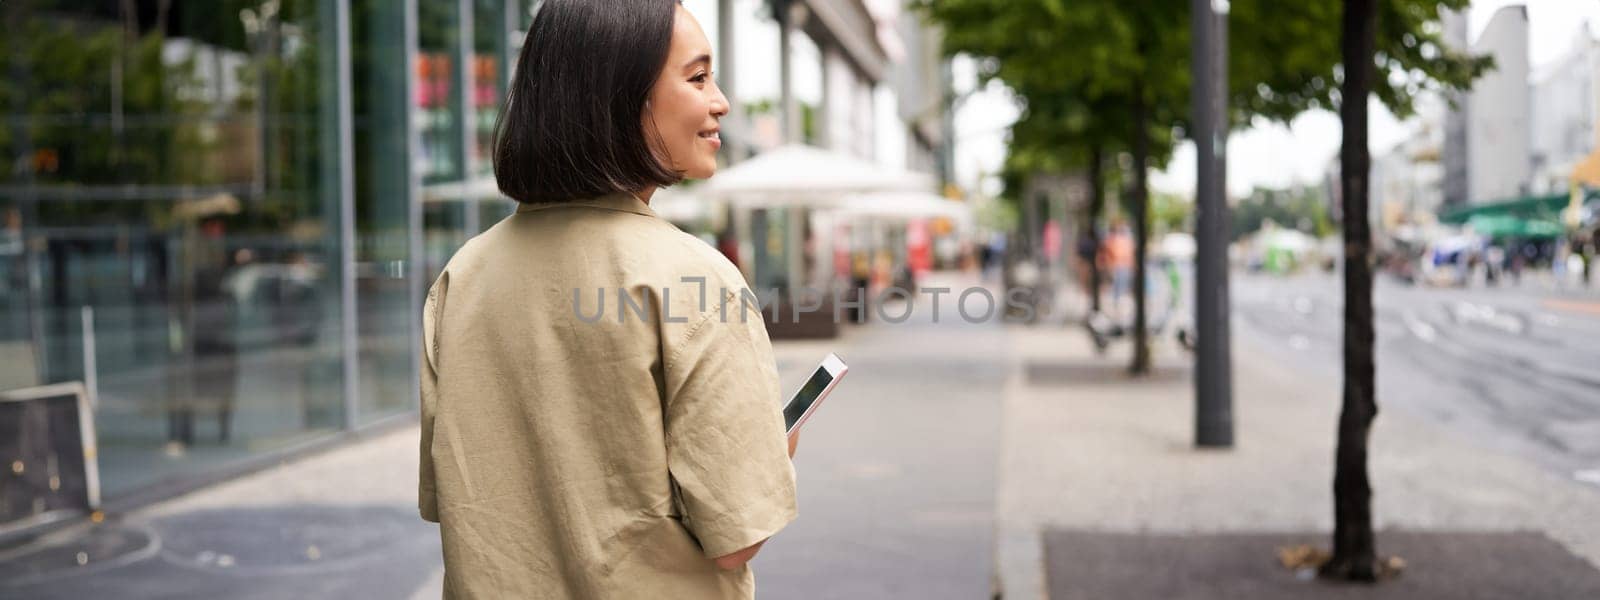 Rear shot of young woman walking in city, going down the street and smiling, holding smartphone. View from behind.